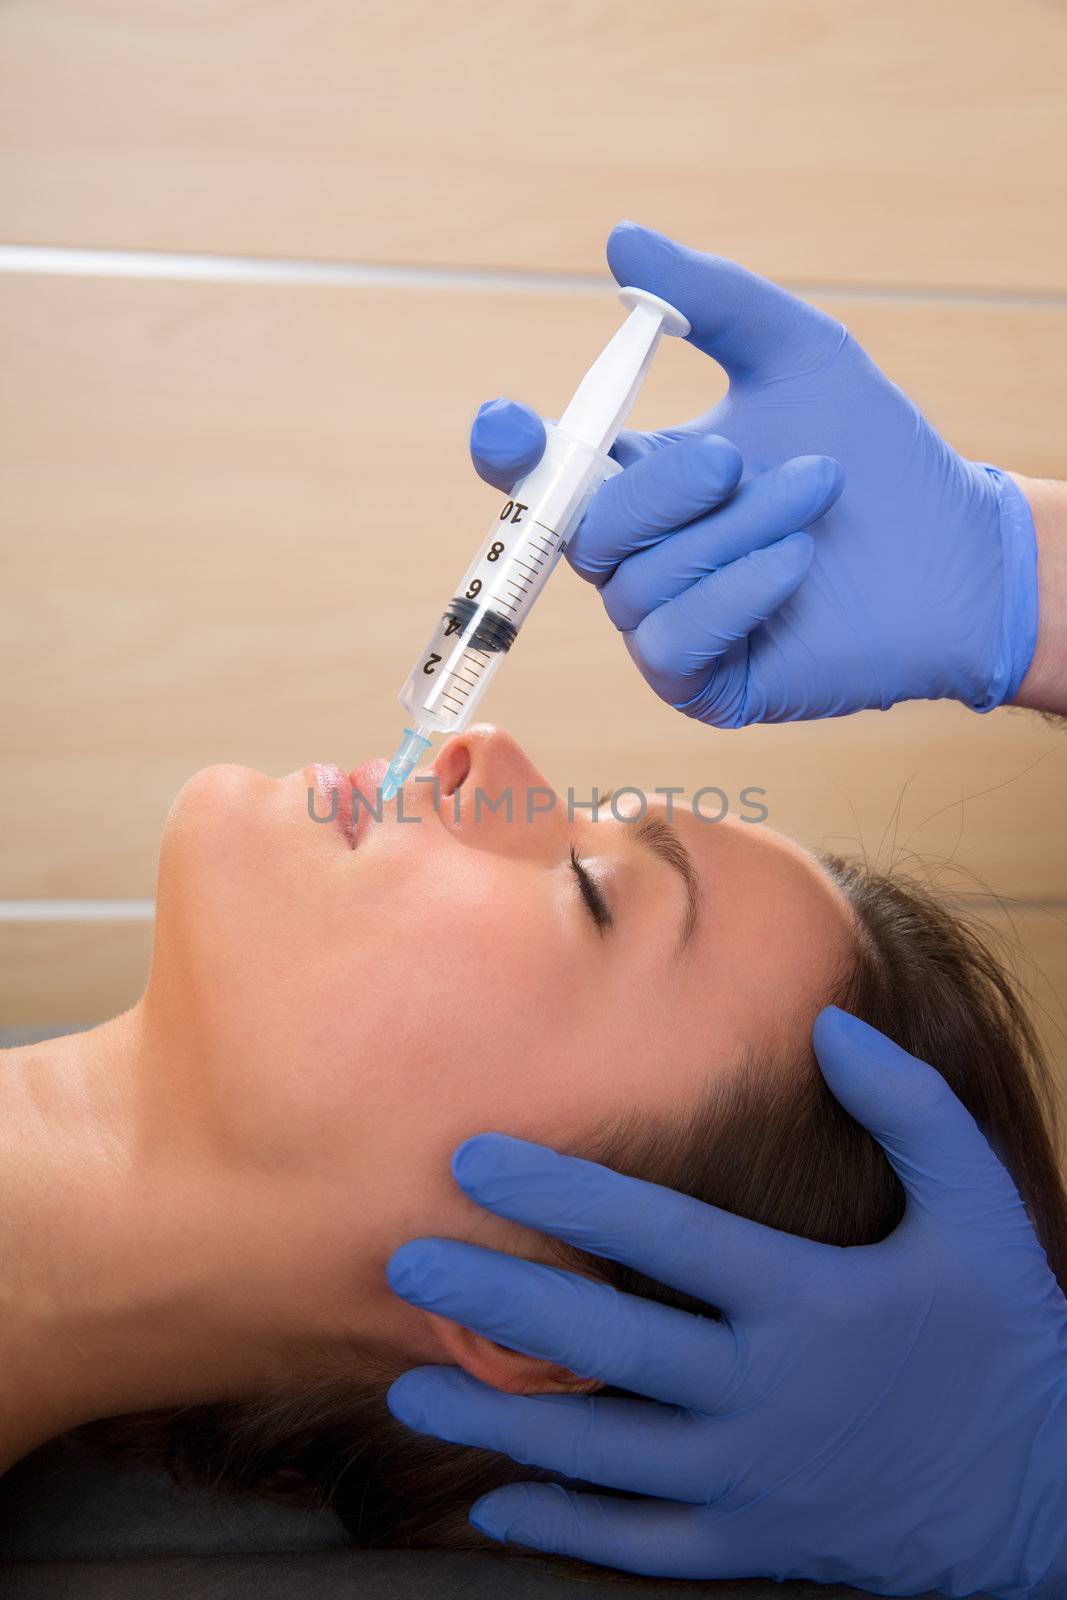 Anti aging facial mesotherapy syringe on woman face by lunamarina